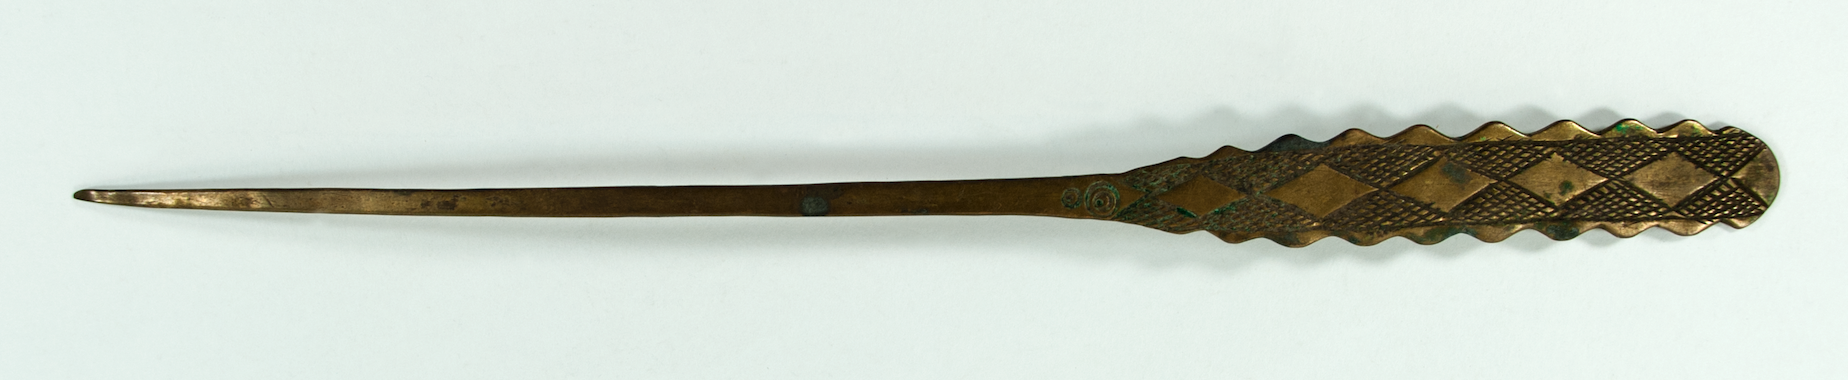 Brass hairpin with serrated style edges and a rounded end. Decorated with vertical lines and diamond shapes surrounded by crosshatching. The shaft of the pin is long and narrow.